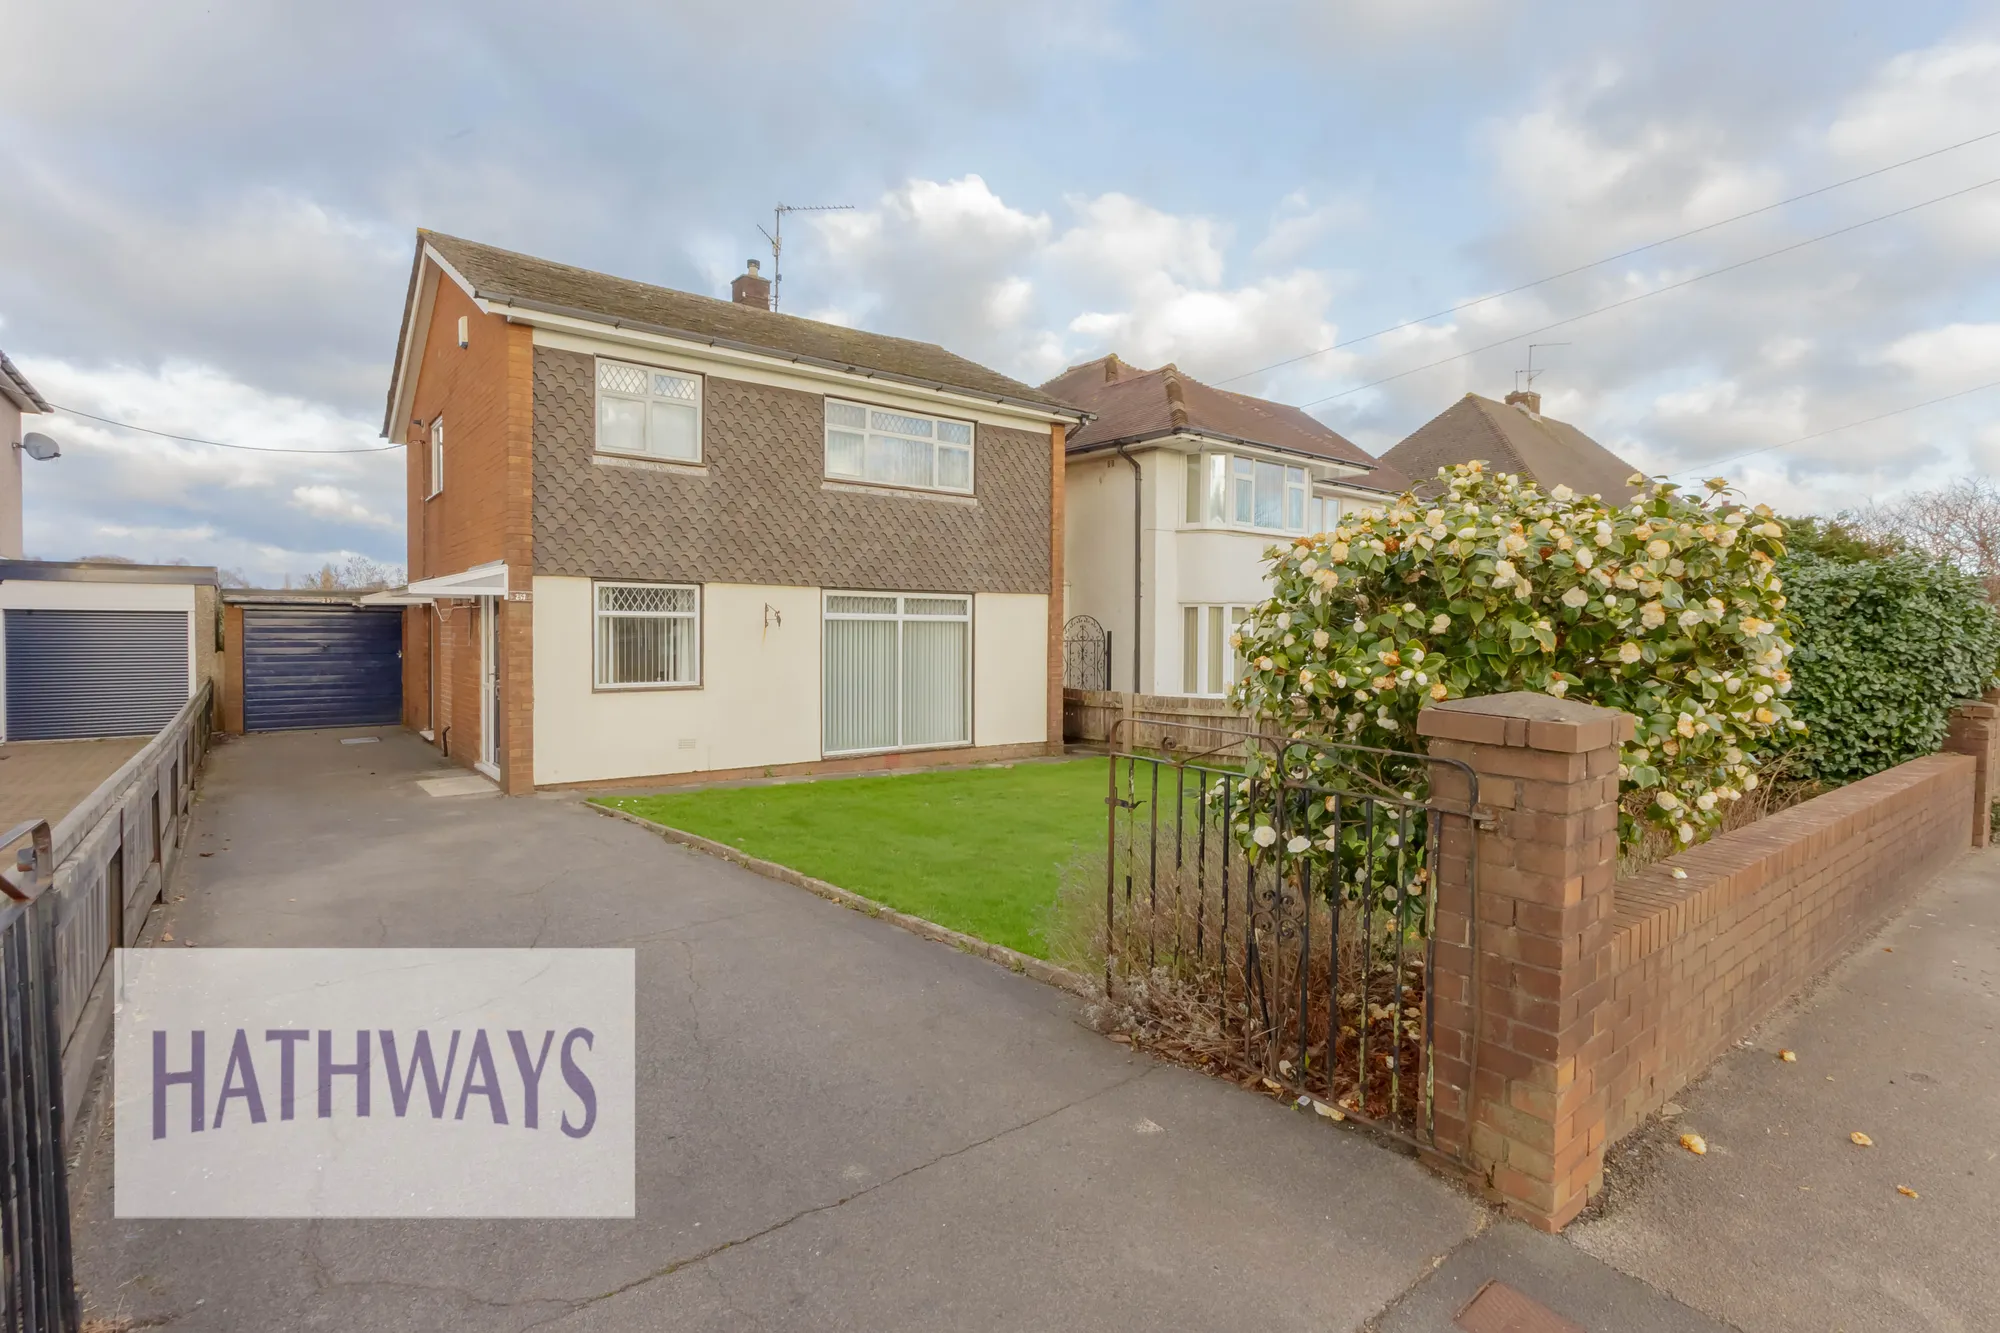 3 bed detached house for sale in Llantarnam Road, Cwmbran  - Property Image 1